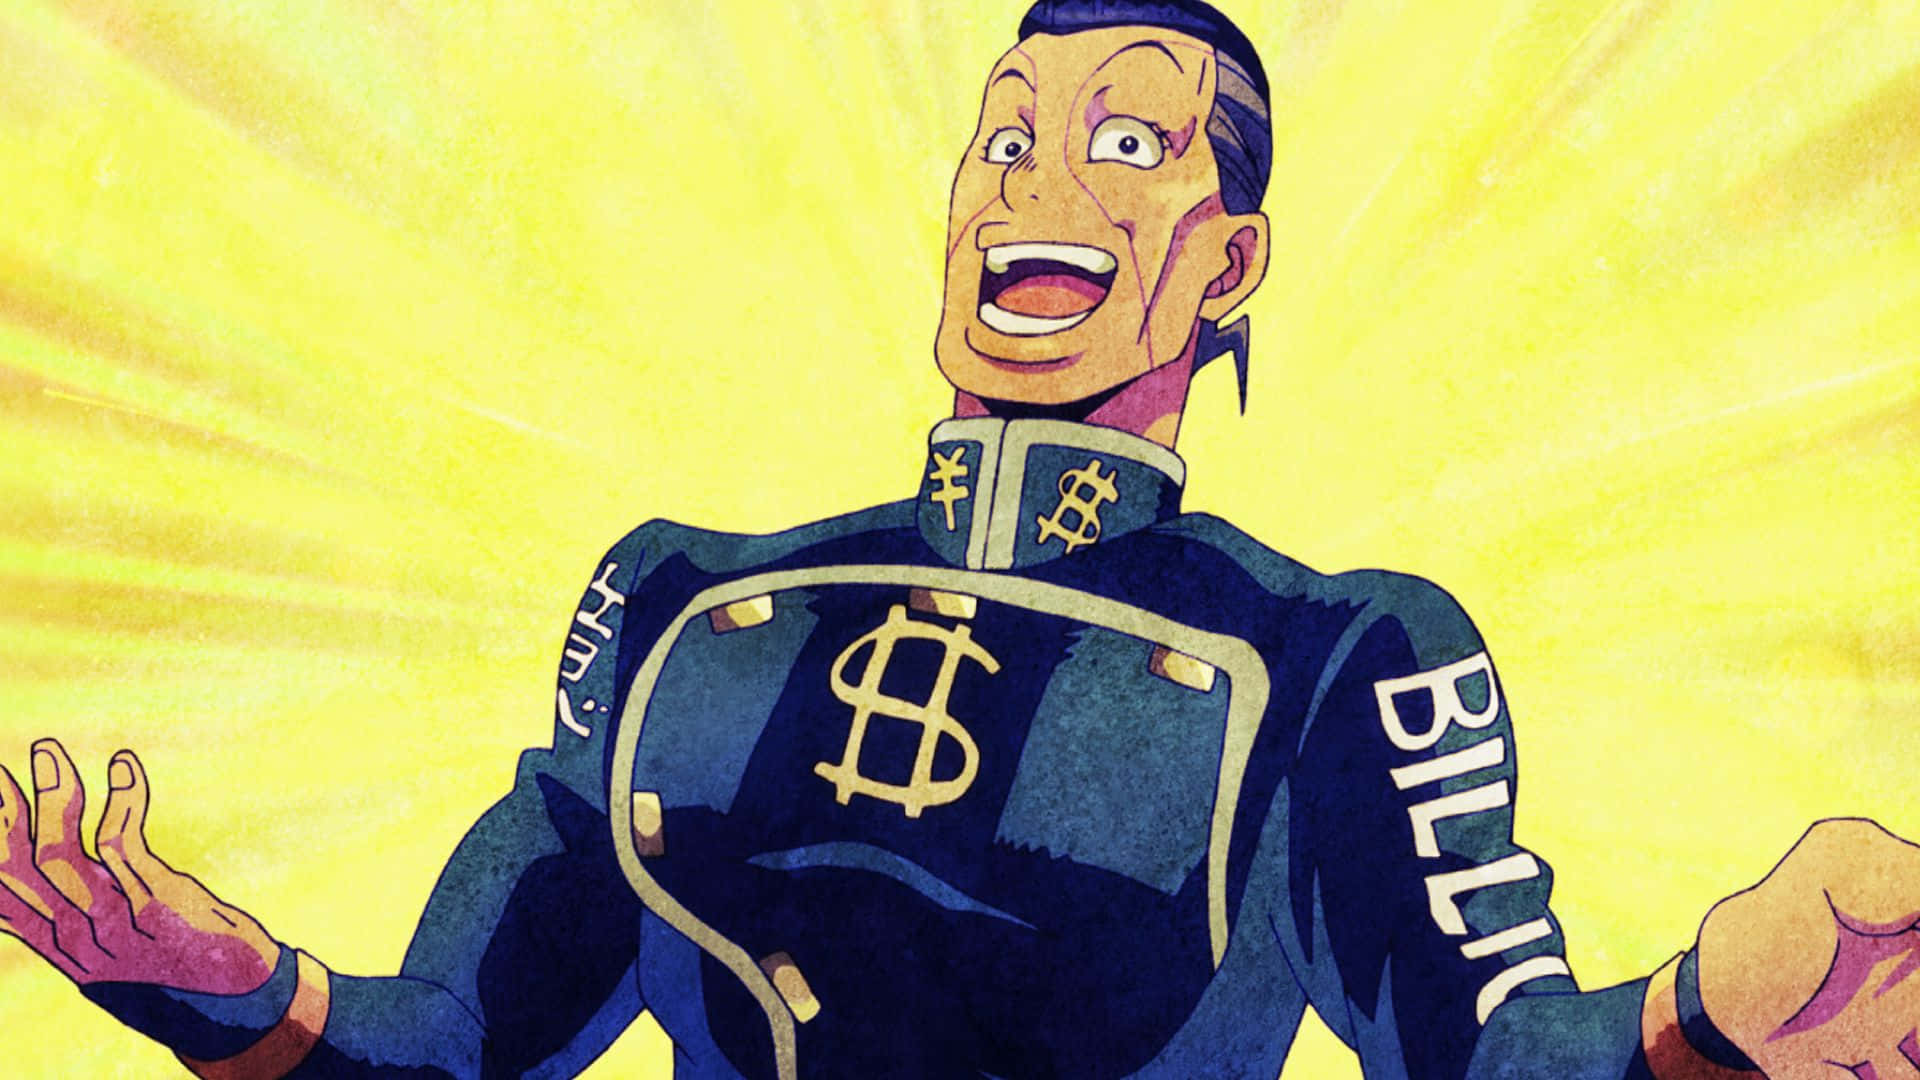 Okuyasu Nijimura striking a dynamic pose in his distinctive outfit against a colorful background Wallpaper